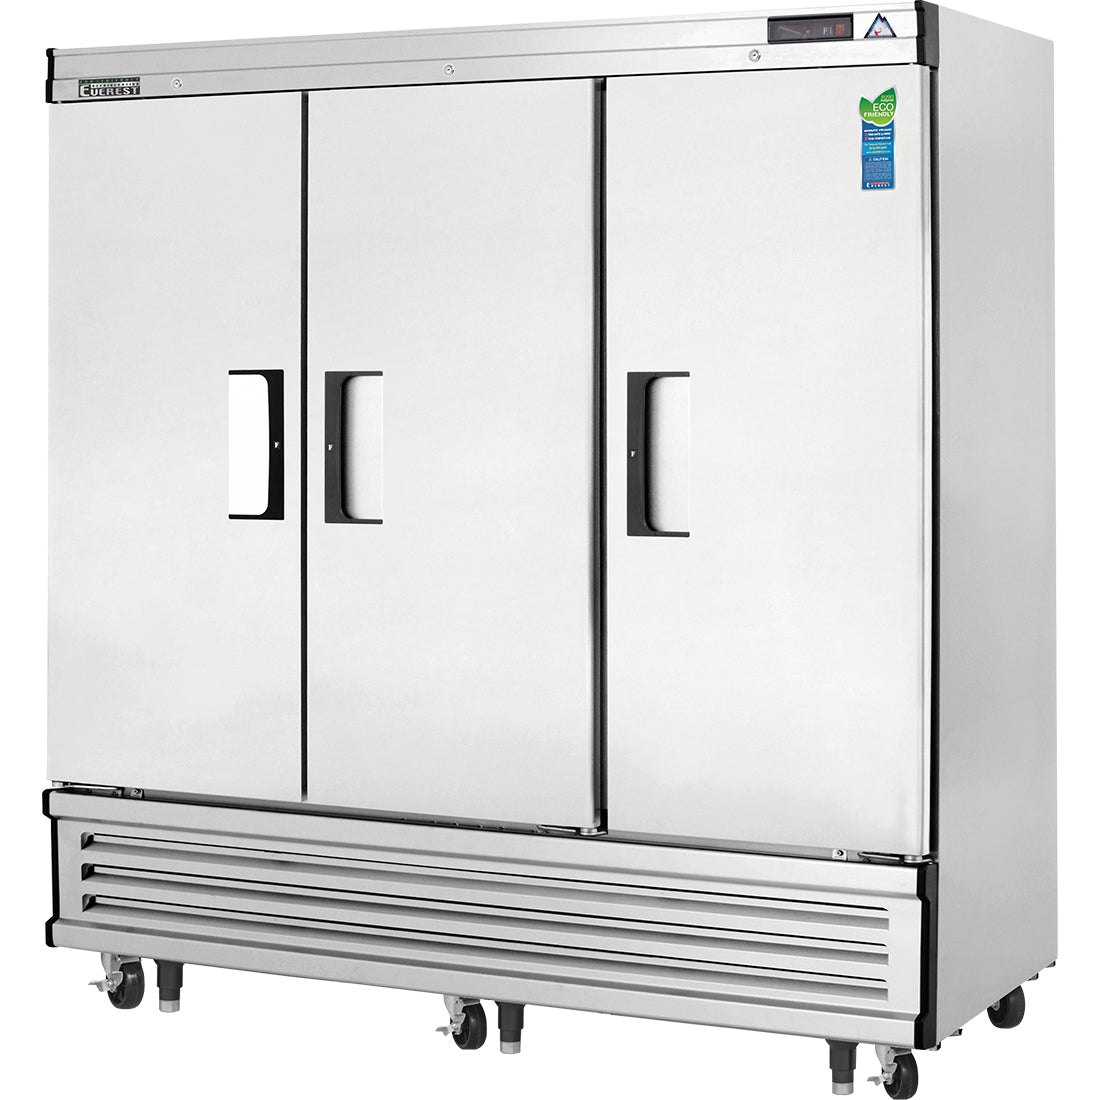 Everest EB Series-EBF3 Three Section Solid Door Upright Reach-In Freezer - 71 Cu. Ft.